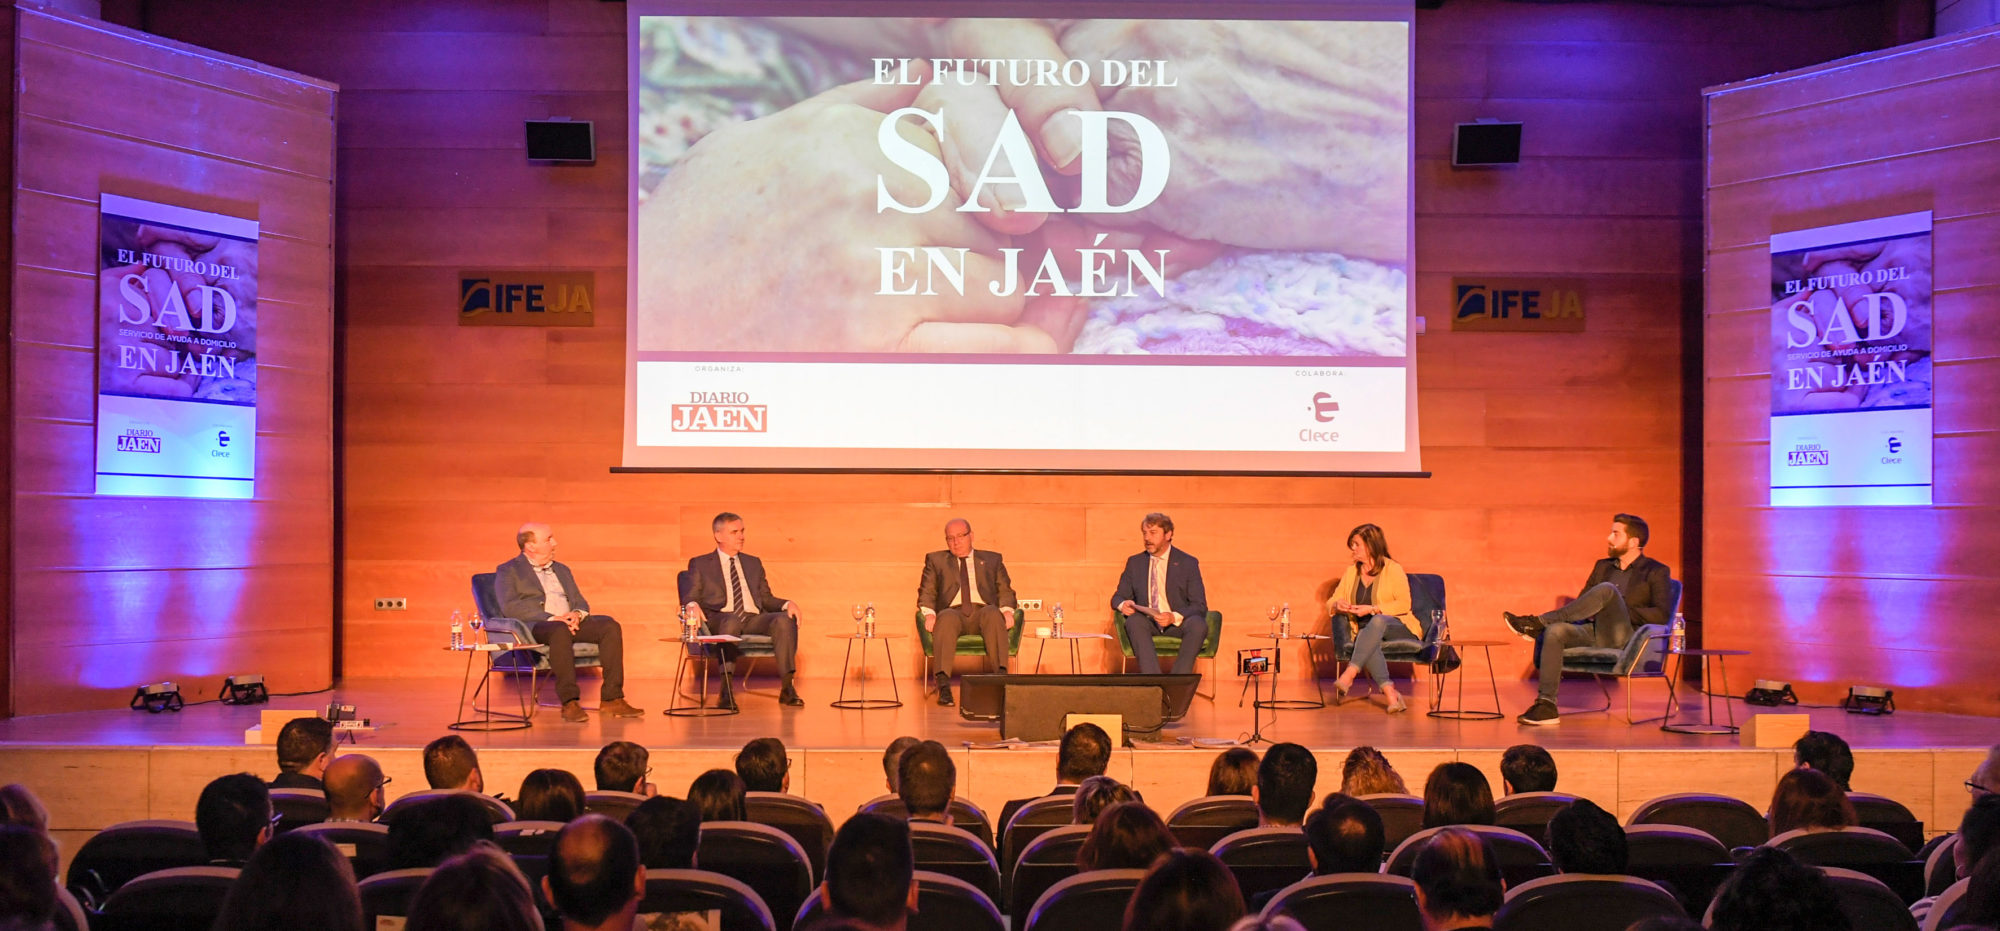 Better Financing and Dignifying Work within the Sector: Some Future Challenges for Home Help Services debated at the Jaen Forum